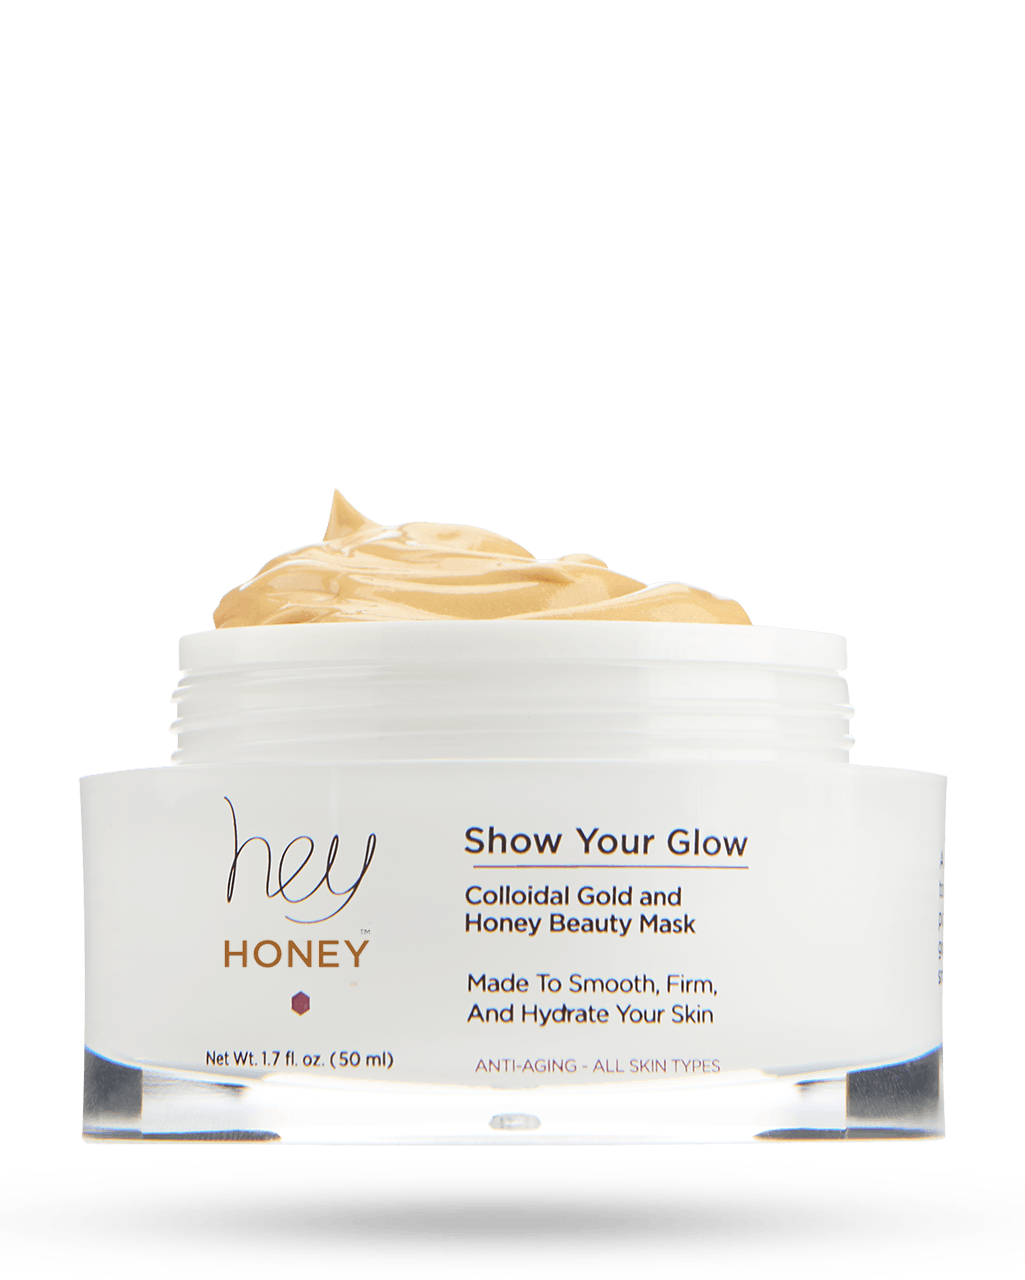 Hey Honey Show Your Glow Colloidal Gold and Honey Beauty Mask